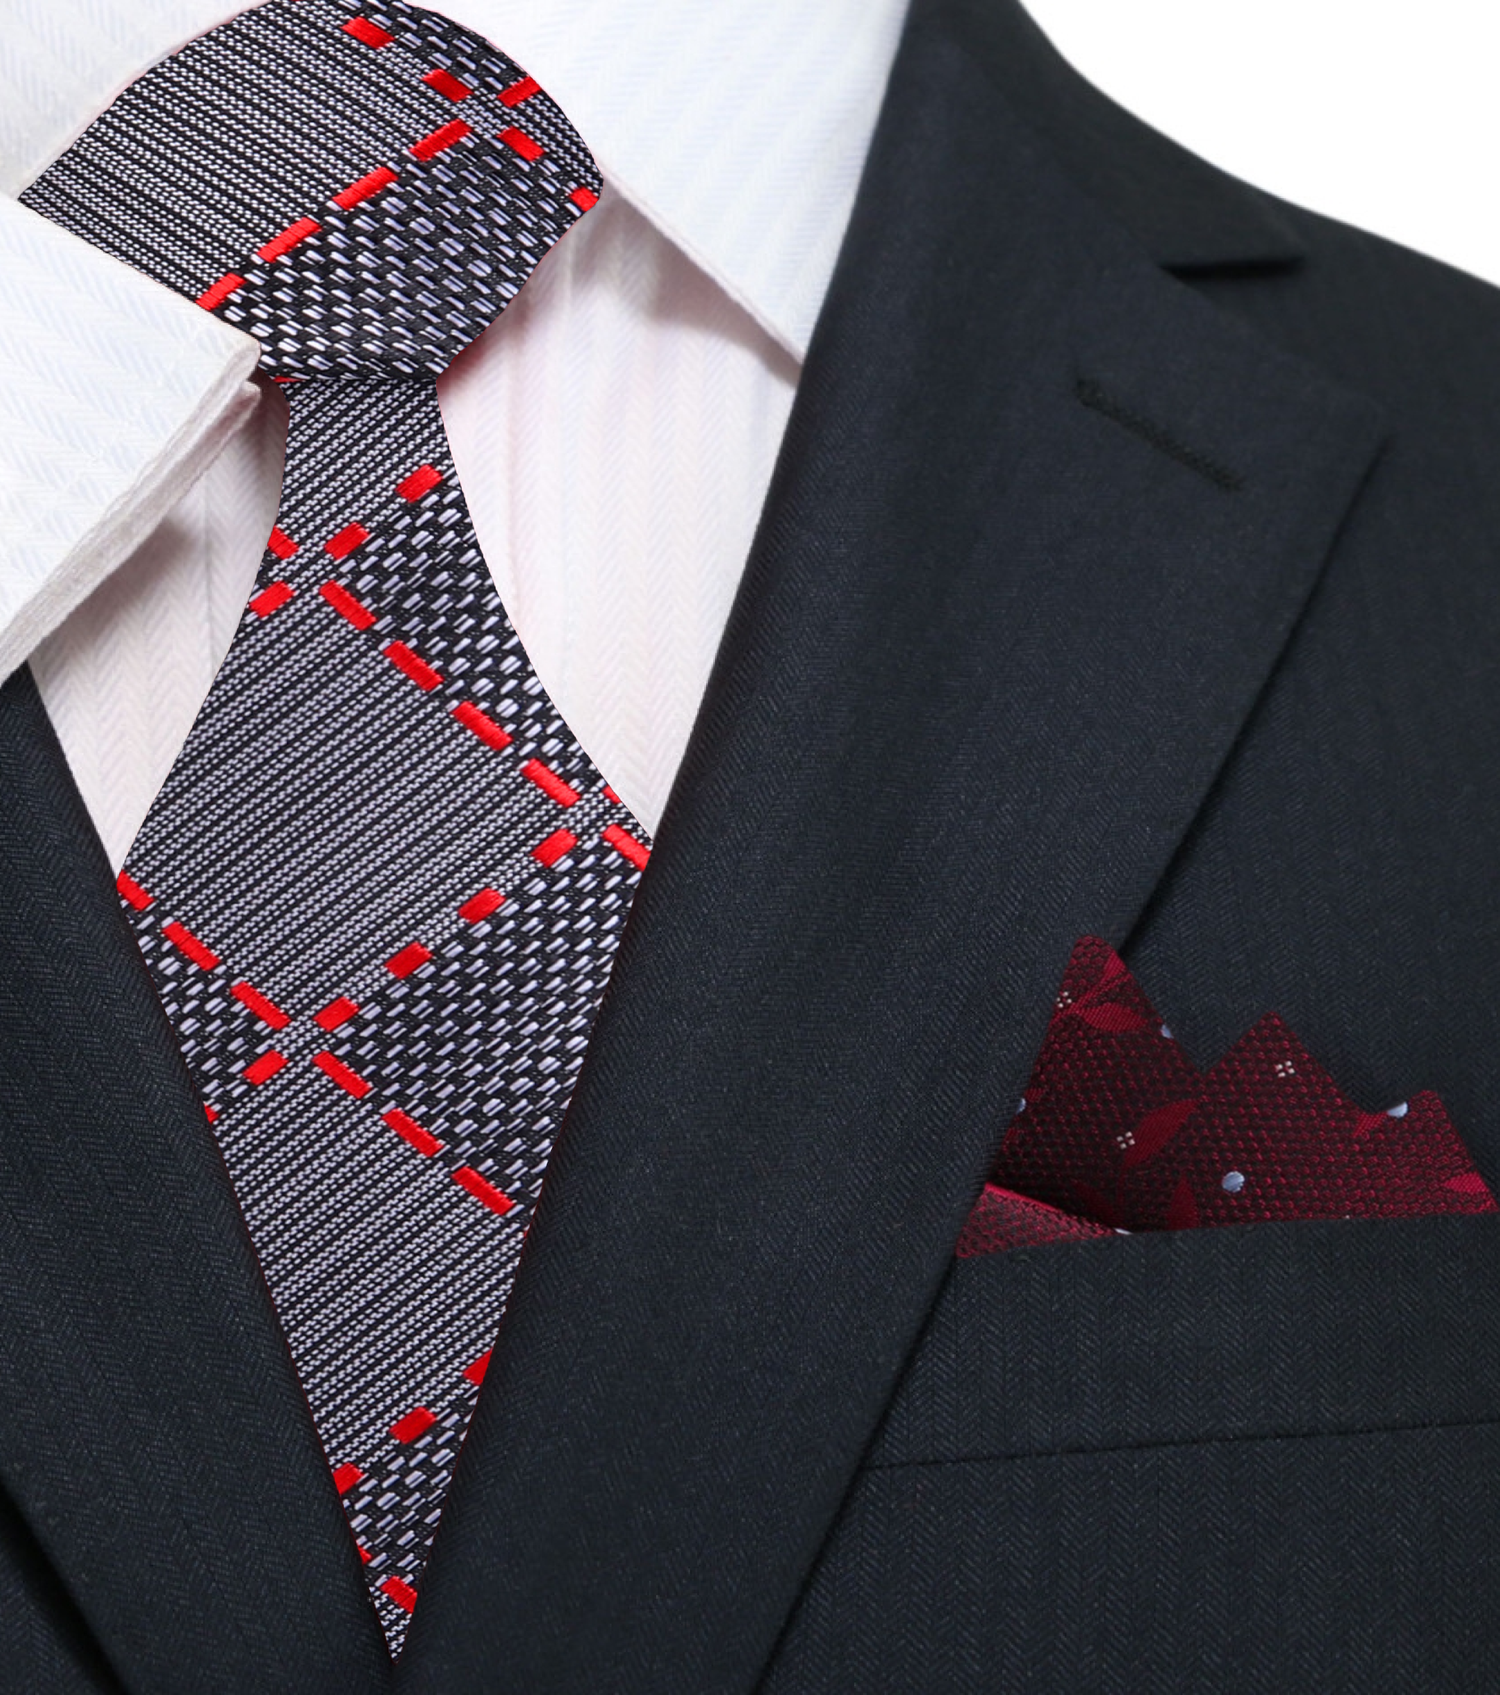 Grey, Red and Black Plaid/Abstract Tie and Accenting Red Floral Pocket Square